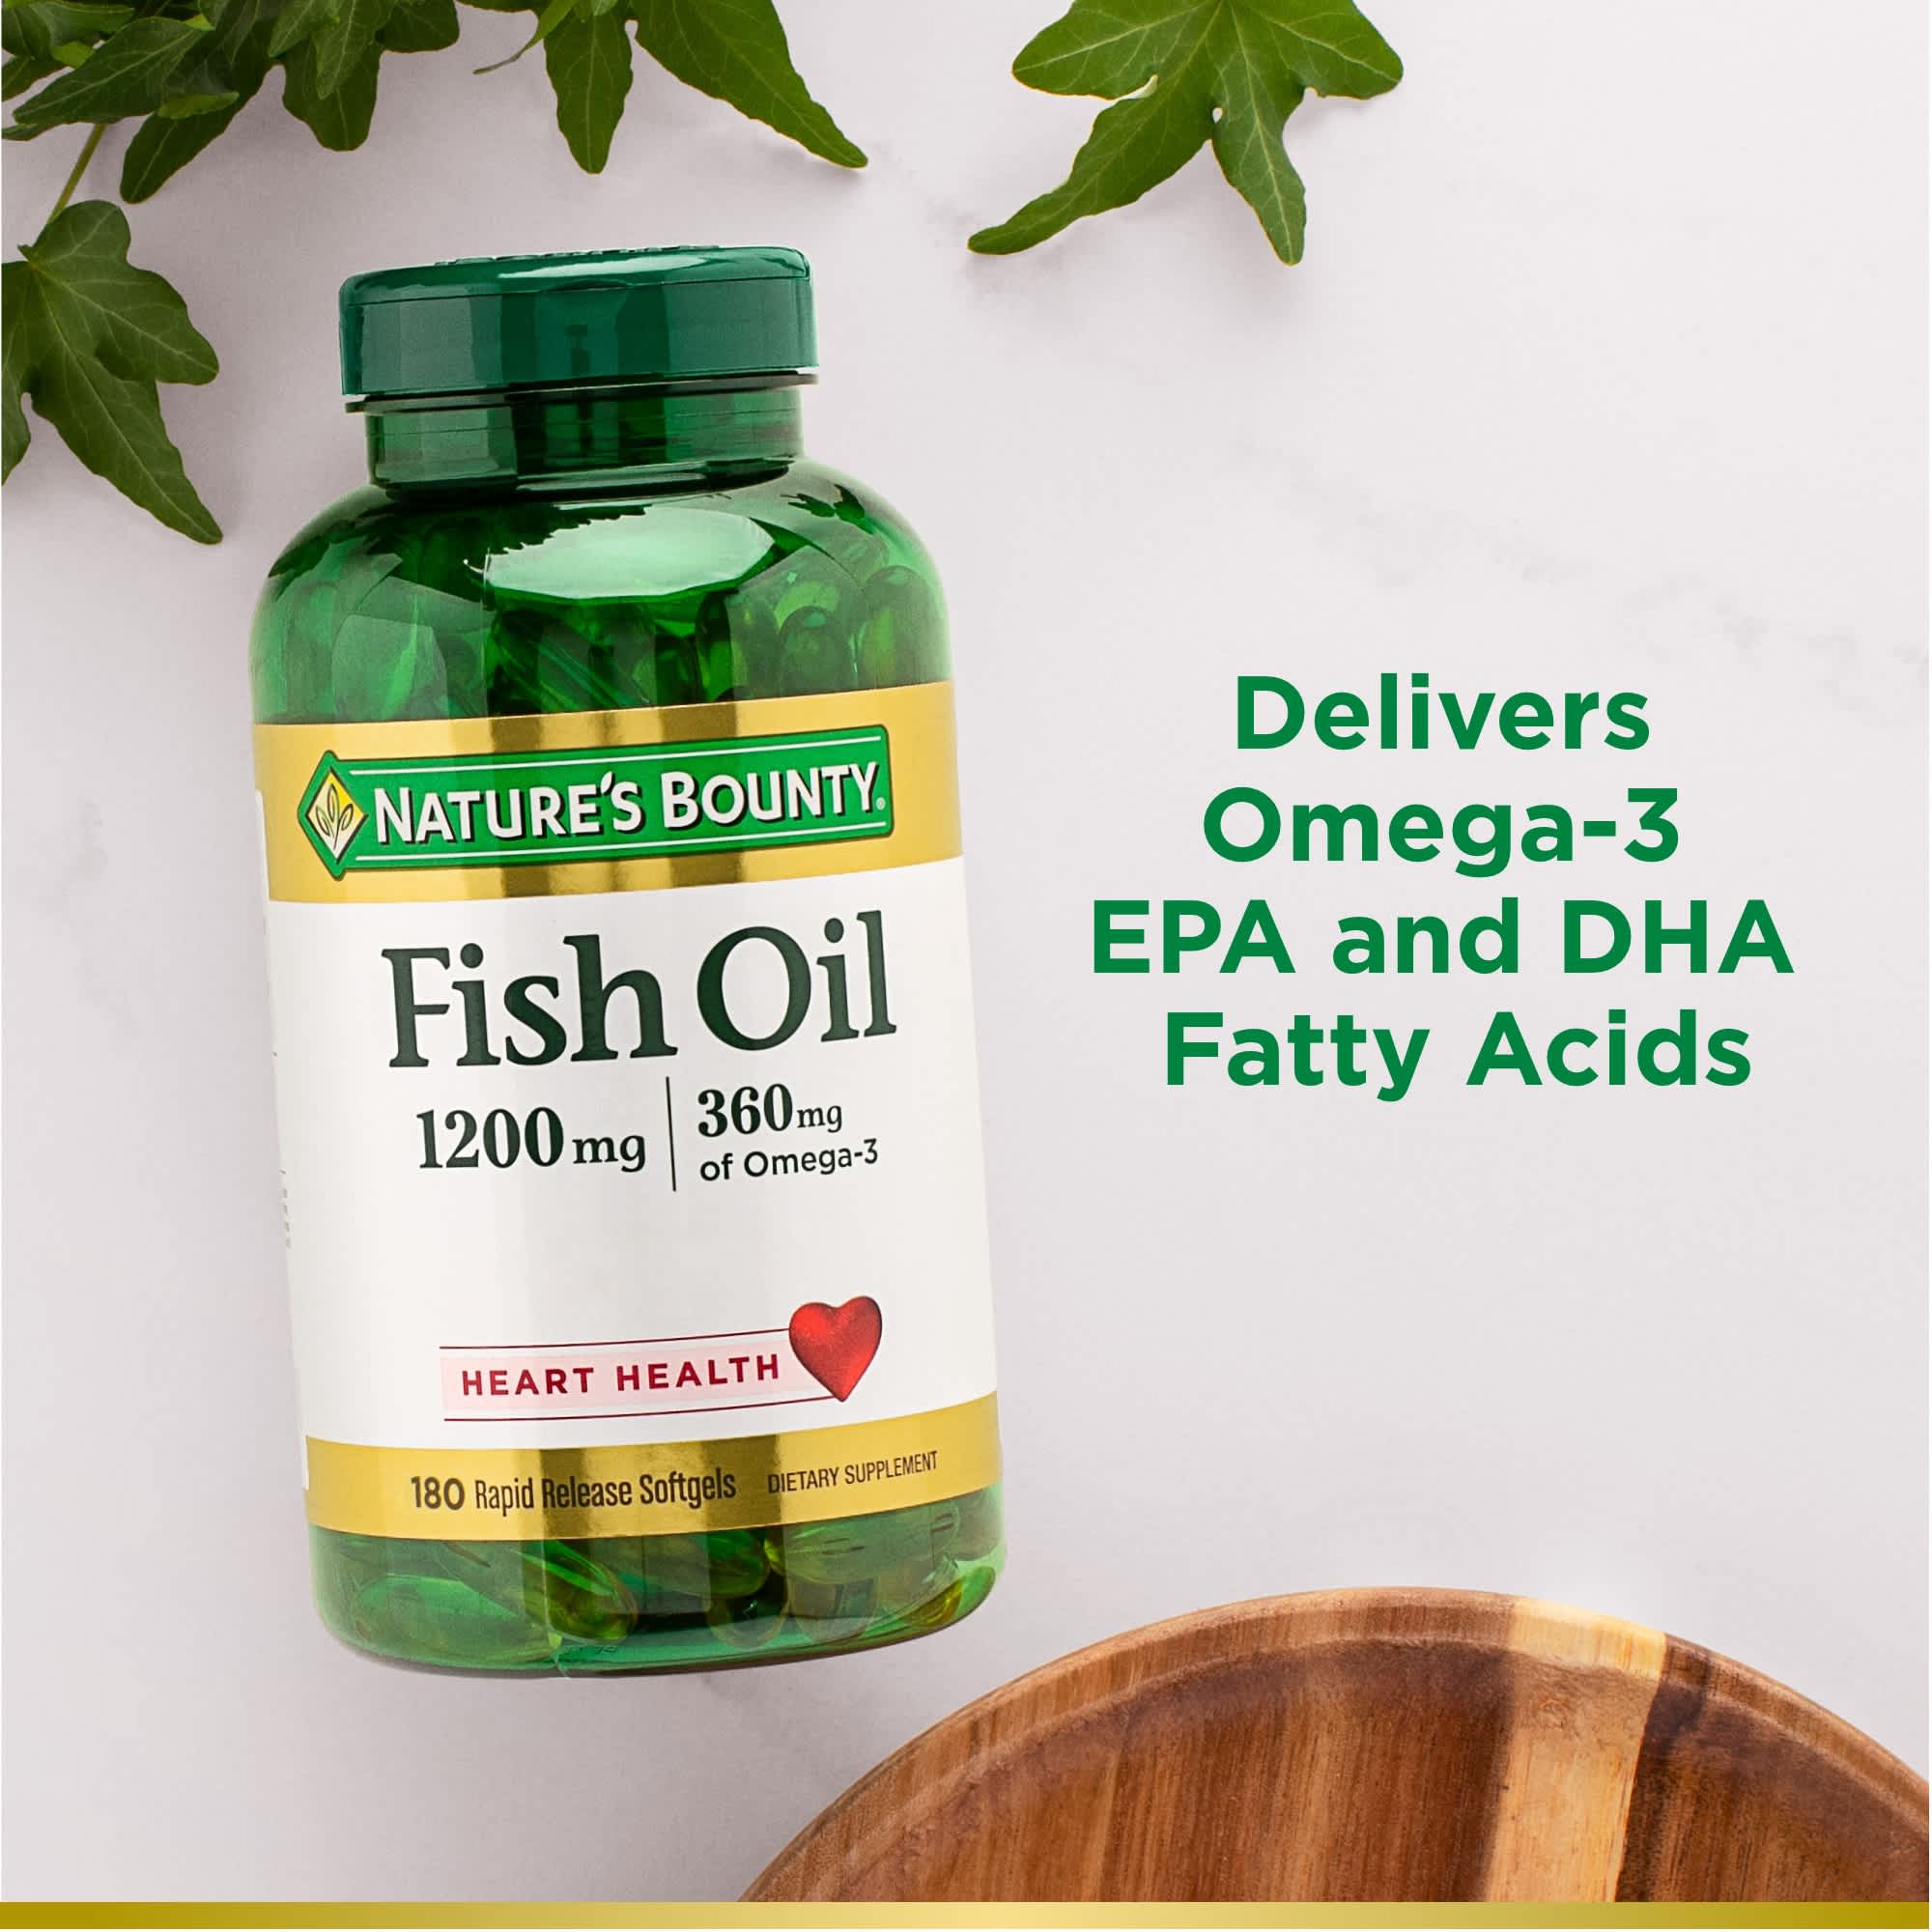 Nature's Bounty Fish Oil With Omega 3 Softgels, 1200 Mg, 200 Ct - image 5 of 8